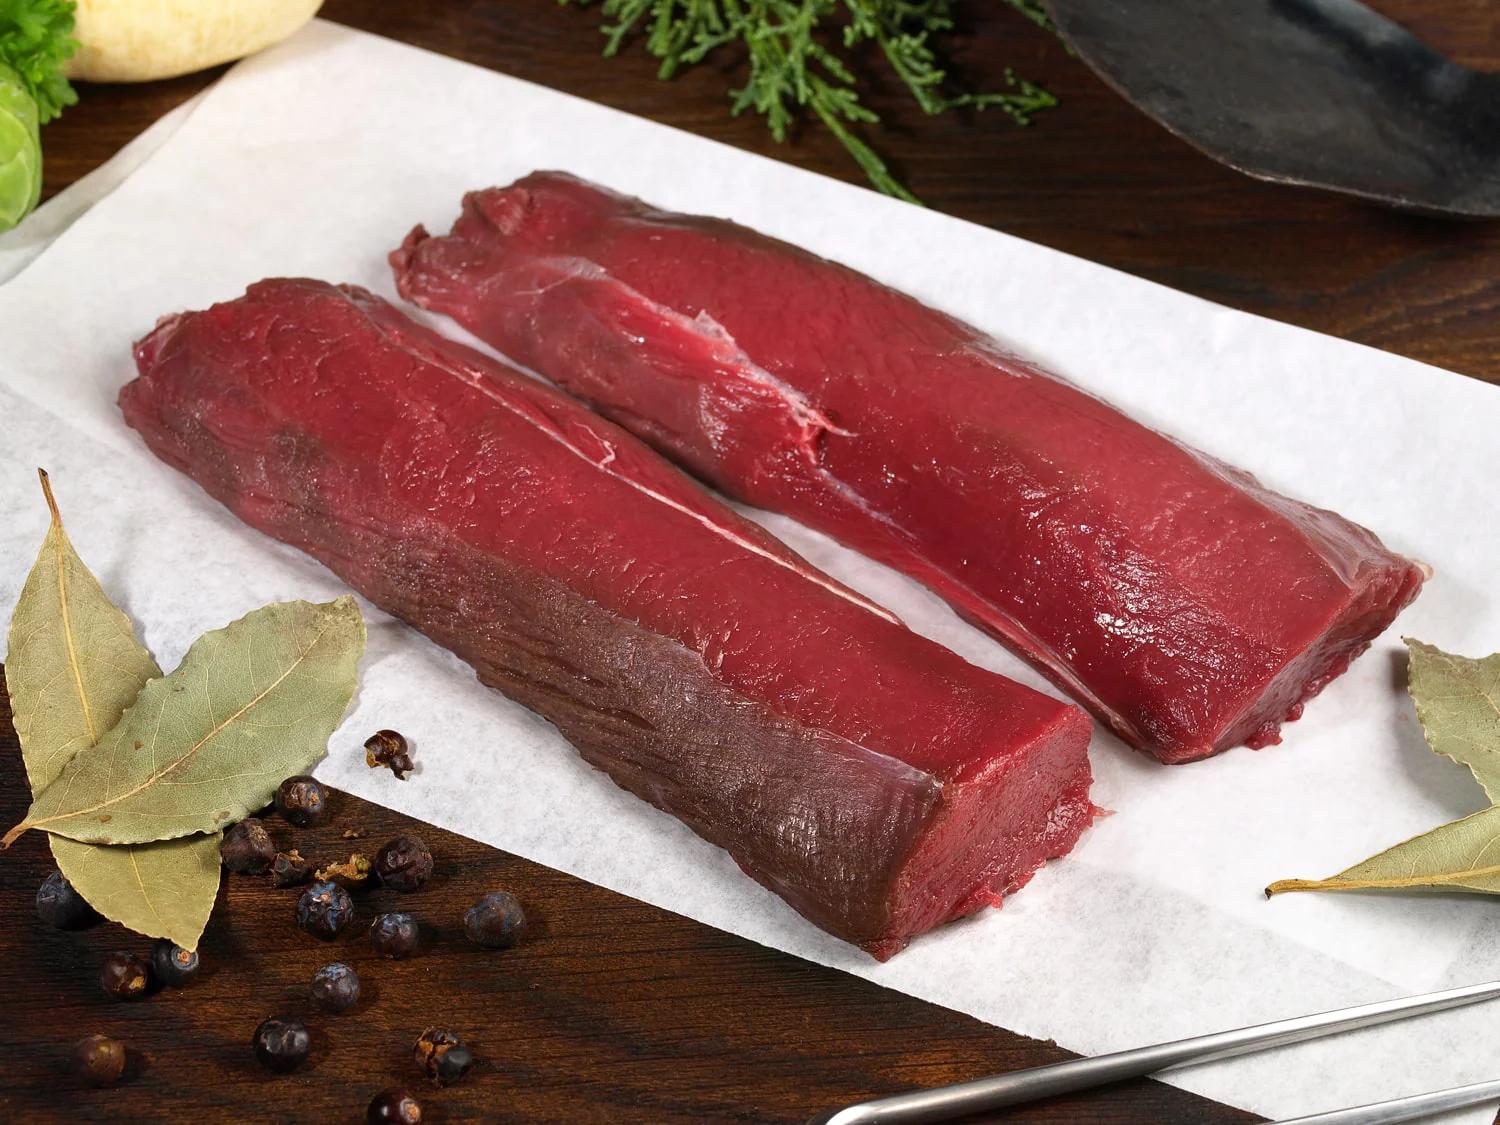 cold smoked venison recipes - What is the best flavor to smoke venison with